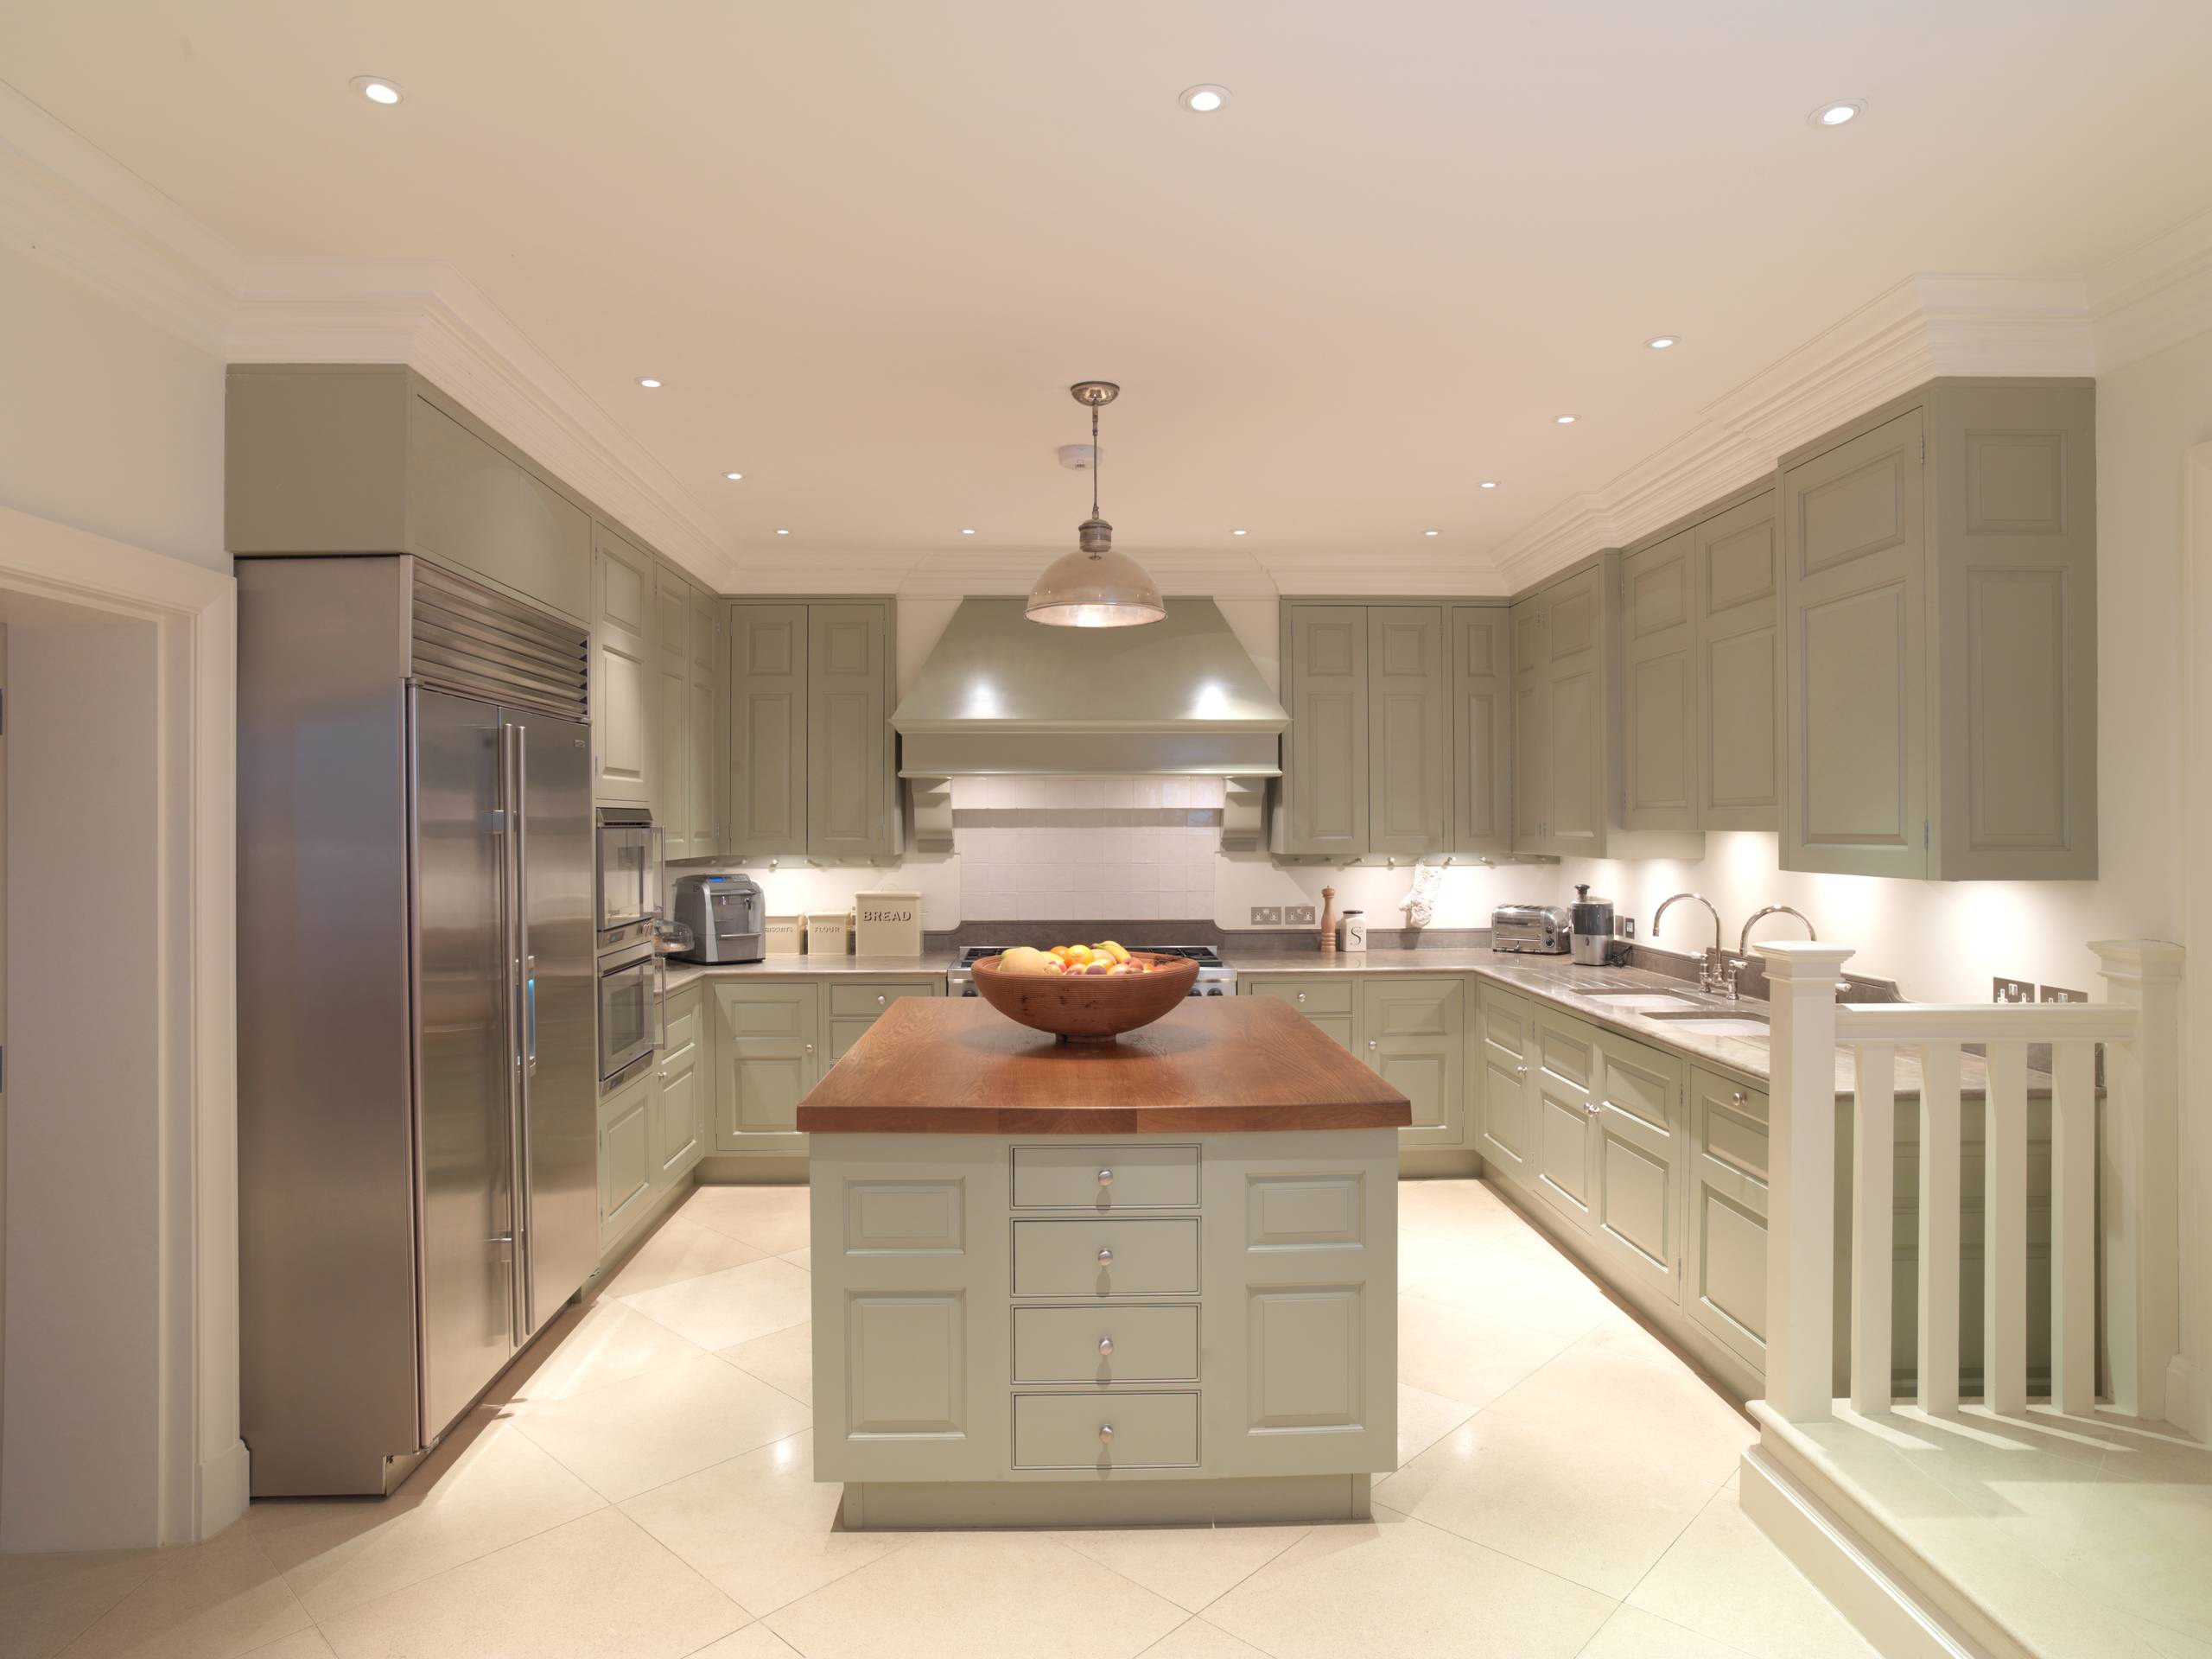 This light and airy kitchen was painted in a Farrow and Ball green, with raised and fielded panels throughout . All the cupboards have adjustable shelves and all the drawers have a painted Farrow and